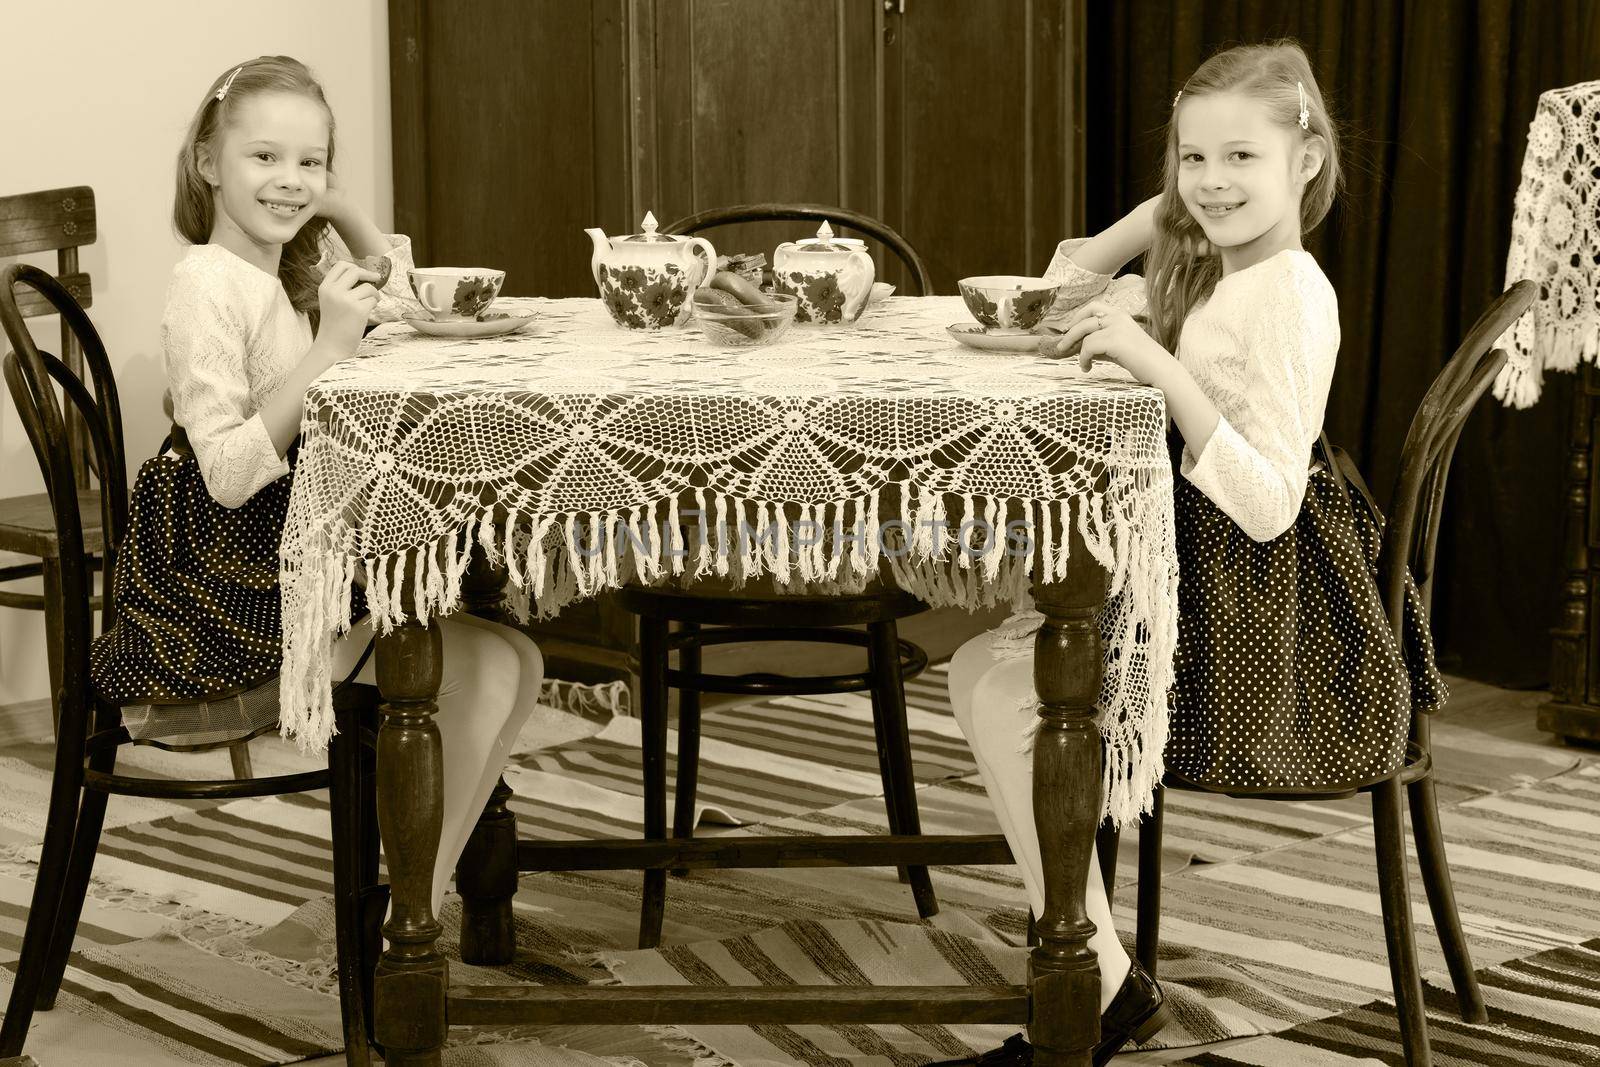 Cute little girls twins drinking tea at an antique table with a lace tablecloth.Black-and-white photo. Retro style.